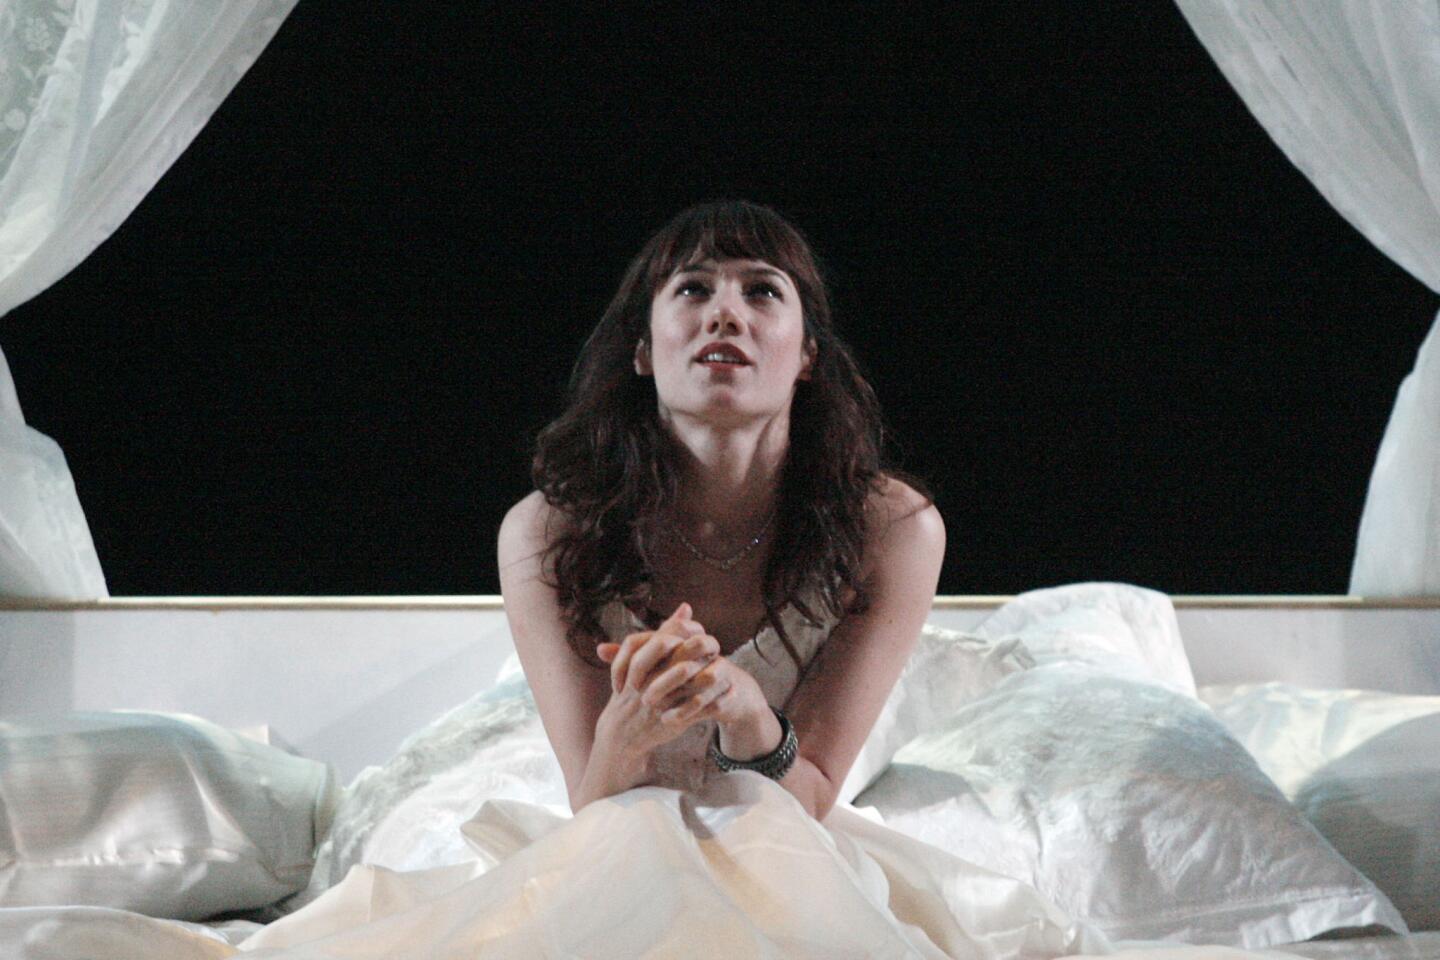 Actress Helen Sadler acts out a scene during a rehearsal for Cymbeline, which took place at A Noise Within in Pasadena on Thursday, September 20, 2012.